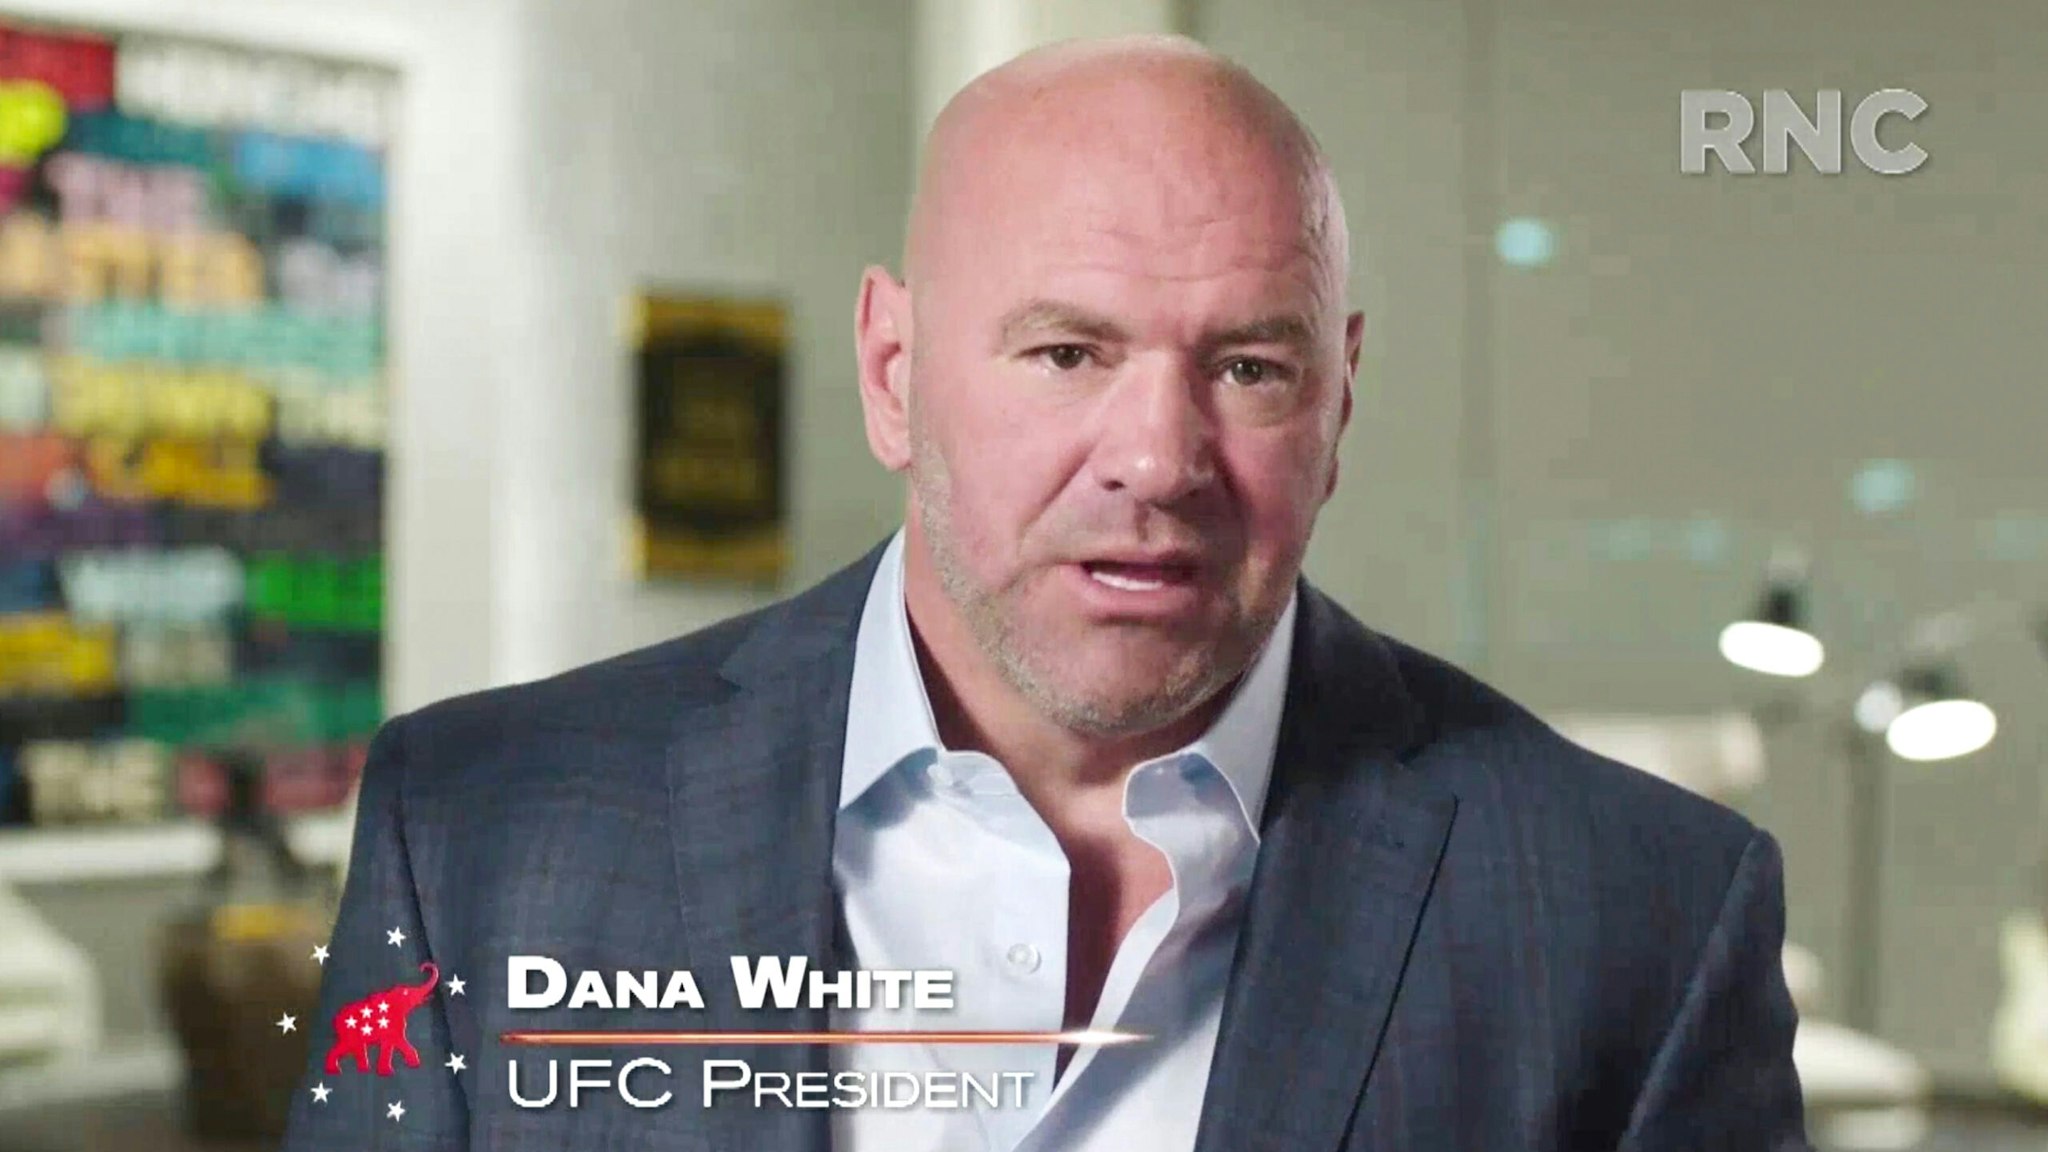 CHARLOTTE, NC - AUGUST 27: (EDITORIAL USE ONLY) In this screenshot from the RNC’s livestream of the 2020 Republican National Convention, UFC President Dana White addresses the virtual convention on August 27, 2020. The convention is being held virtually due to the coronavirus pandemic but will include speeches from various locations including Charlotte, North Carolina and Washington, DC.